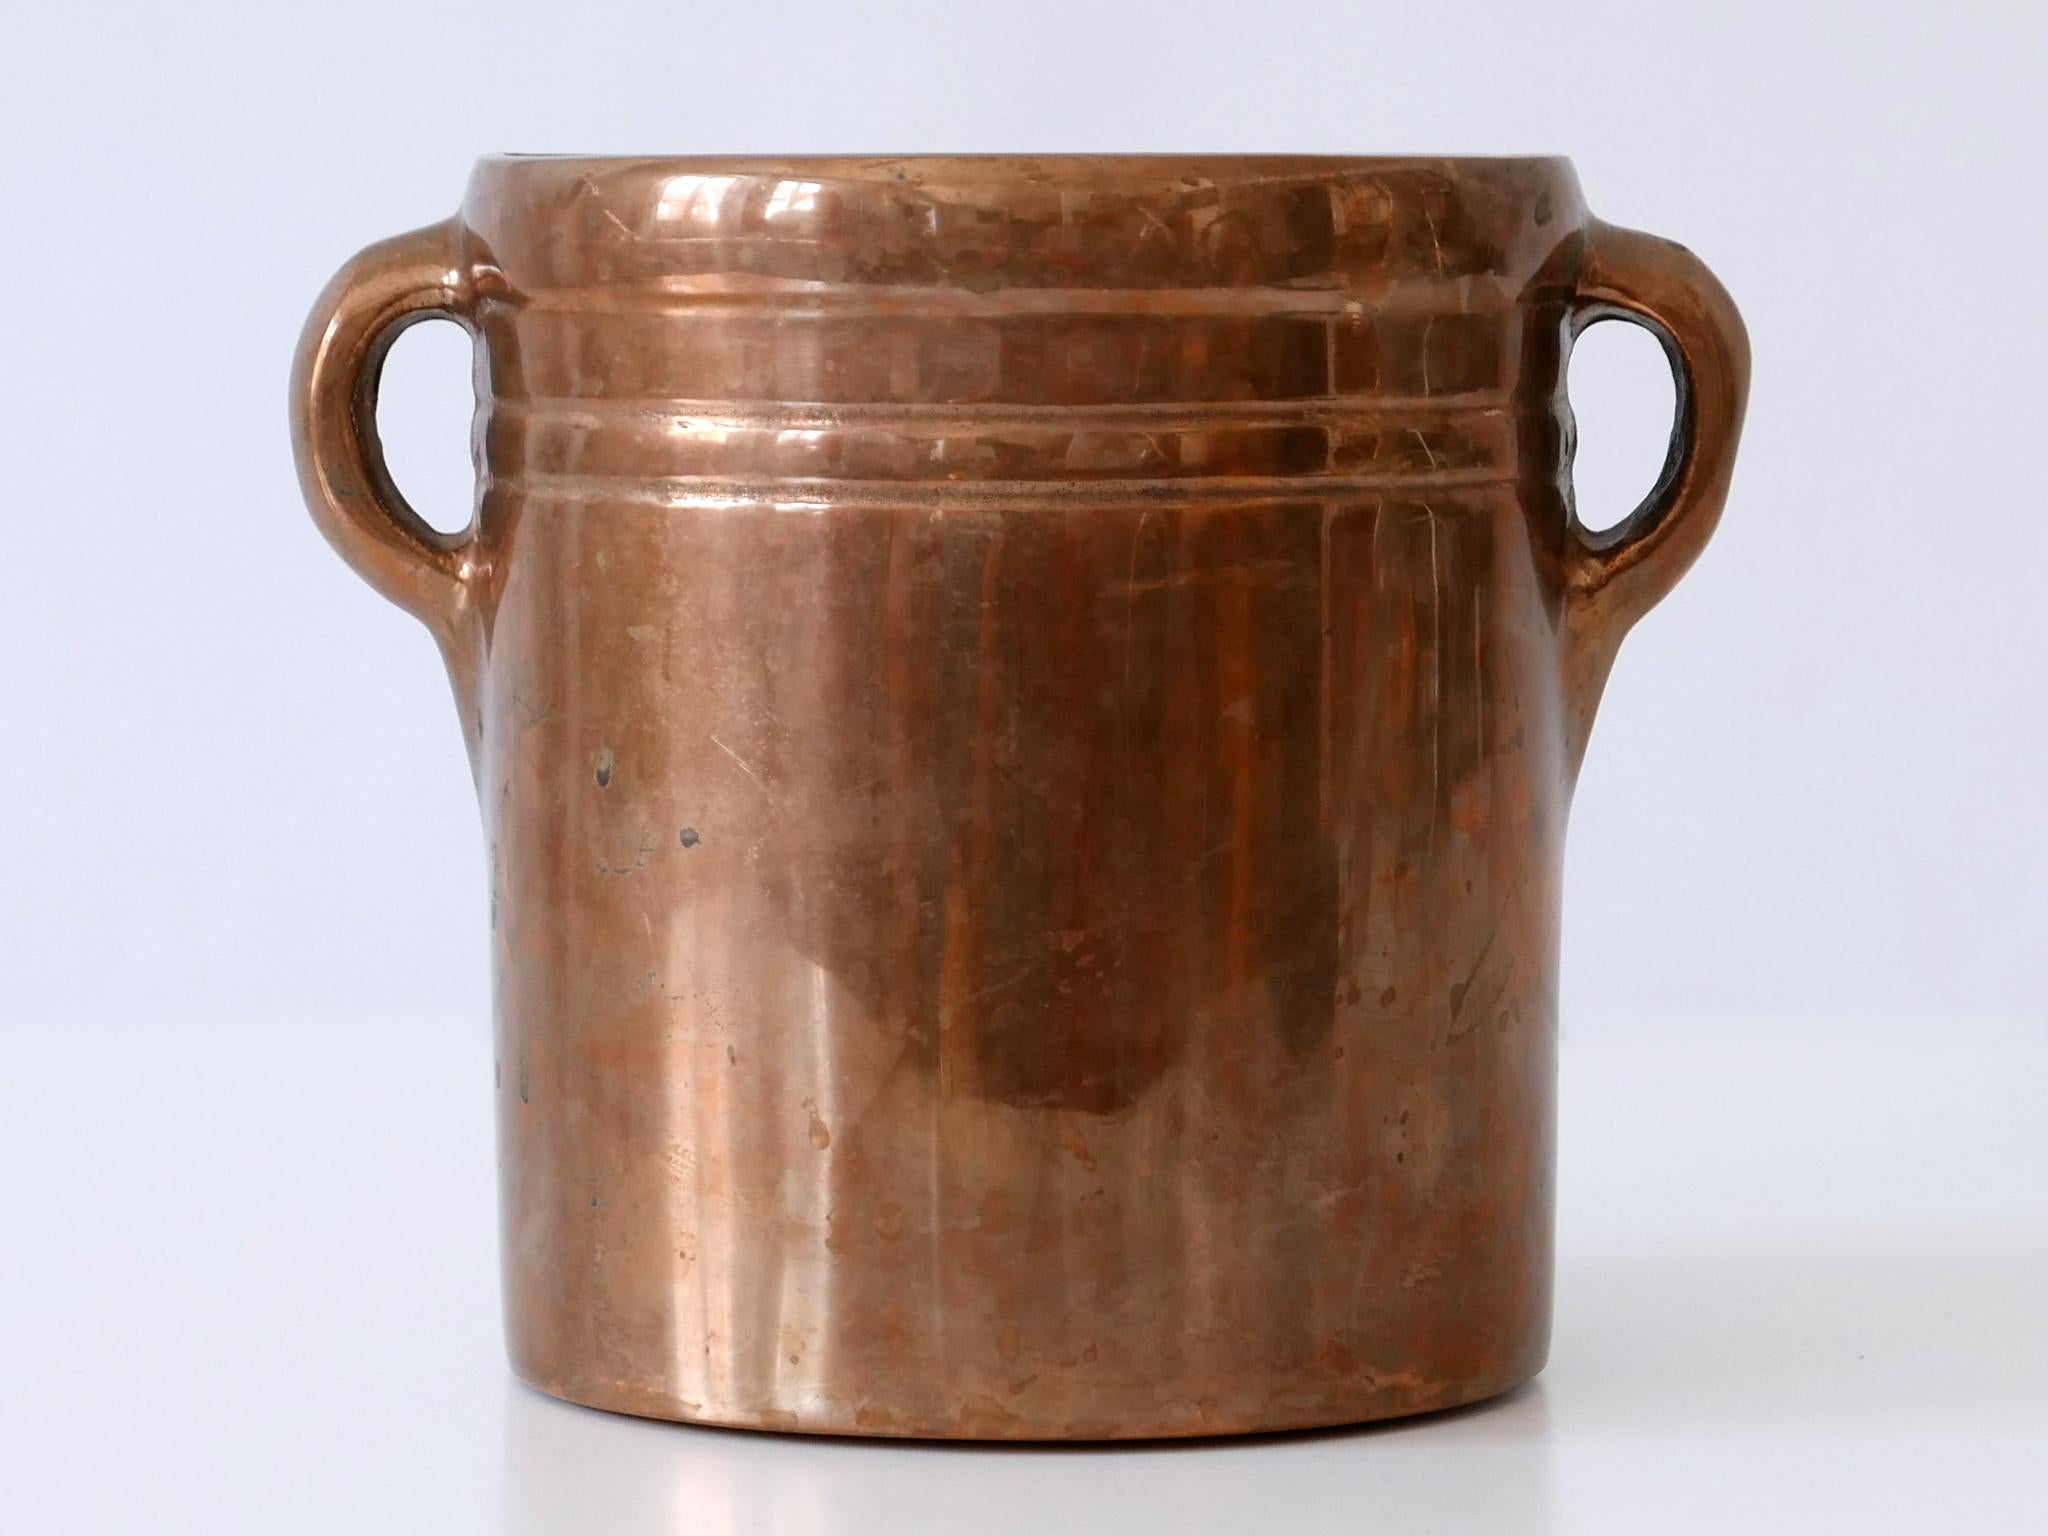 Extremely rare, elegant and highly decorative Mid-Century Modern solid bronze champagne cooler or ice bucket. Designed by Esa Fedrigolli for Esart, Italy, 1970s. Signed: Esa Fedrigolli and at the bottom rest of a label: ESART.

Executed in solid,